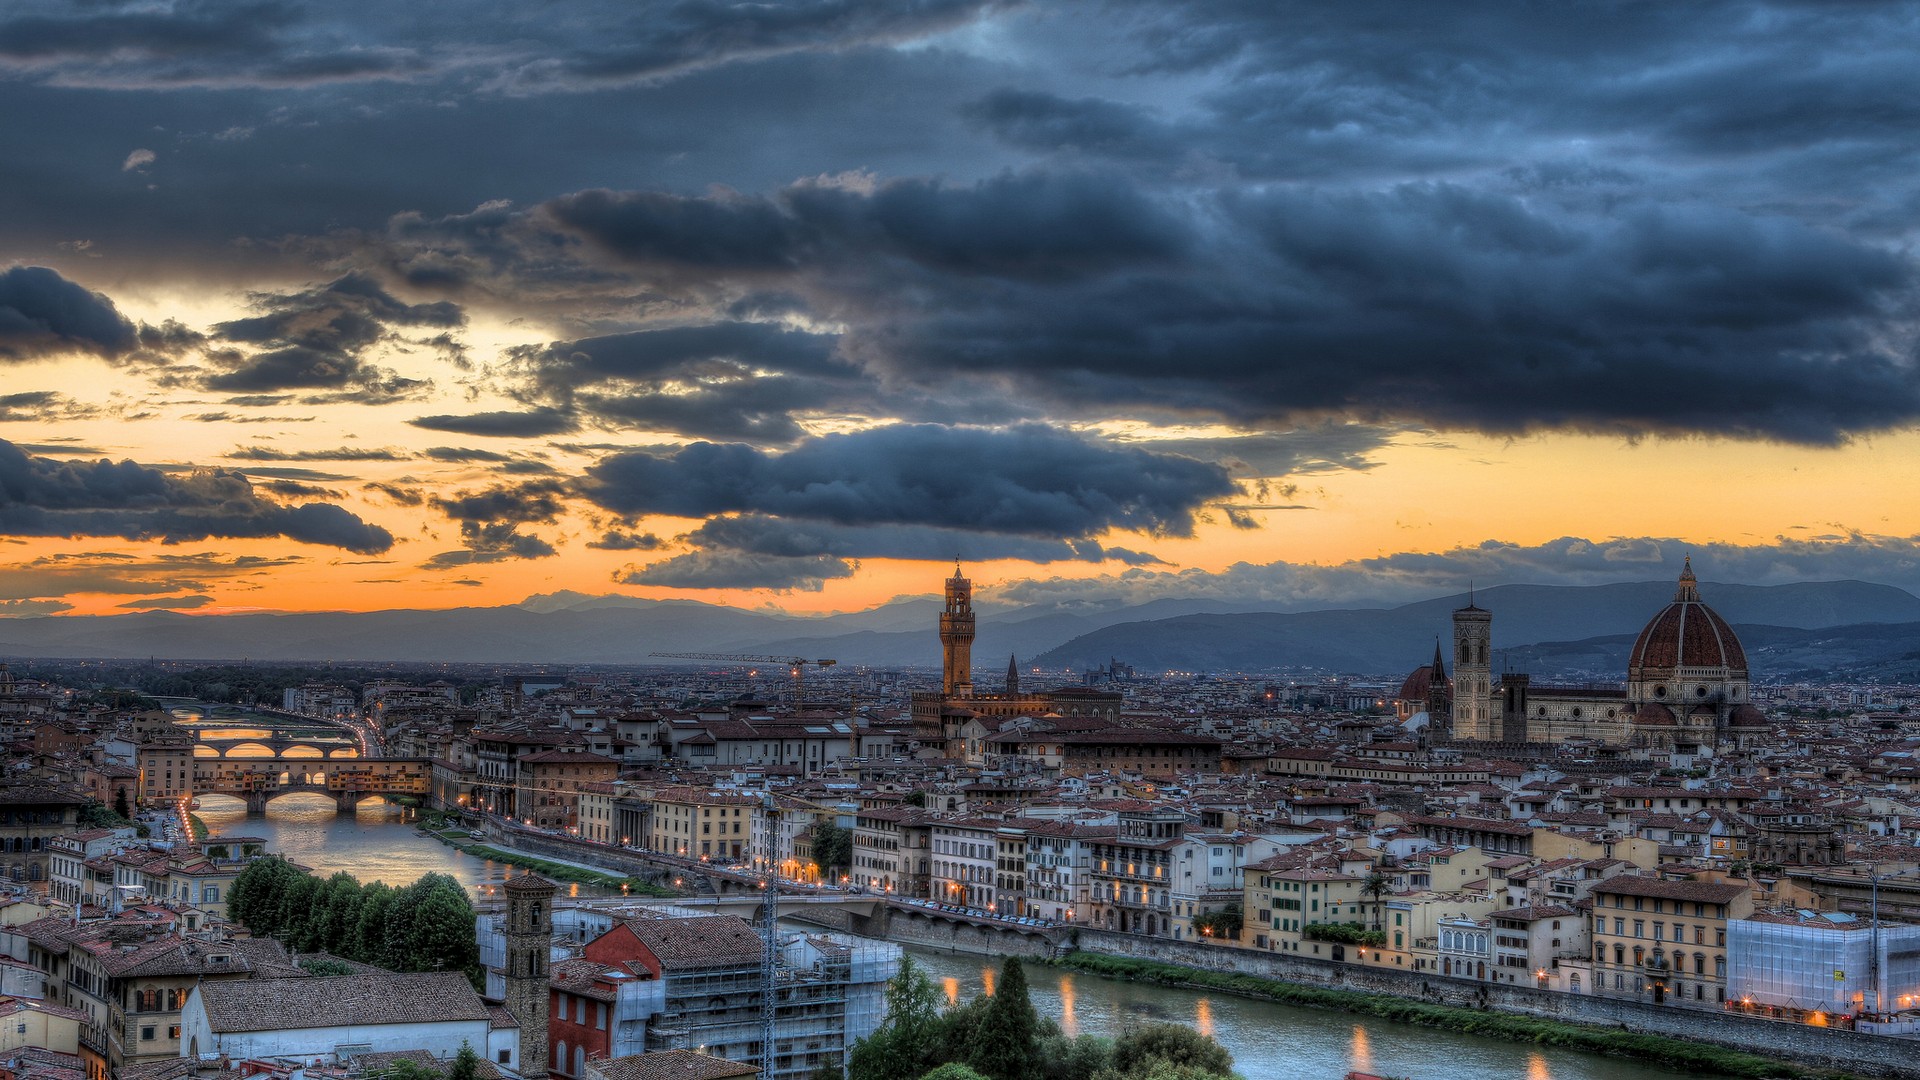 1920x1080 florence italy city cityscape architecture florence cathedral gothic architecture river sunset clouds wallpaper JPG 576 kB. Mocah HD Wallpaper